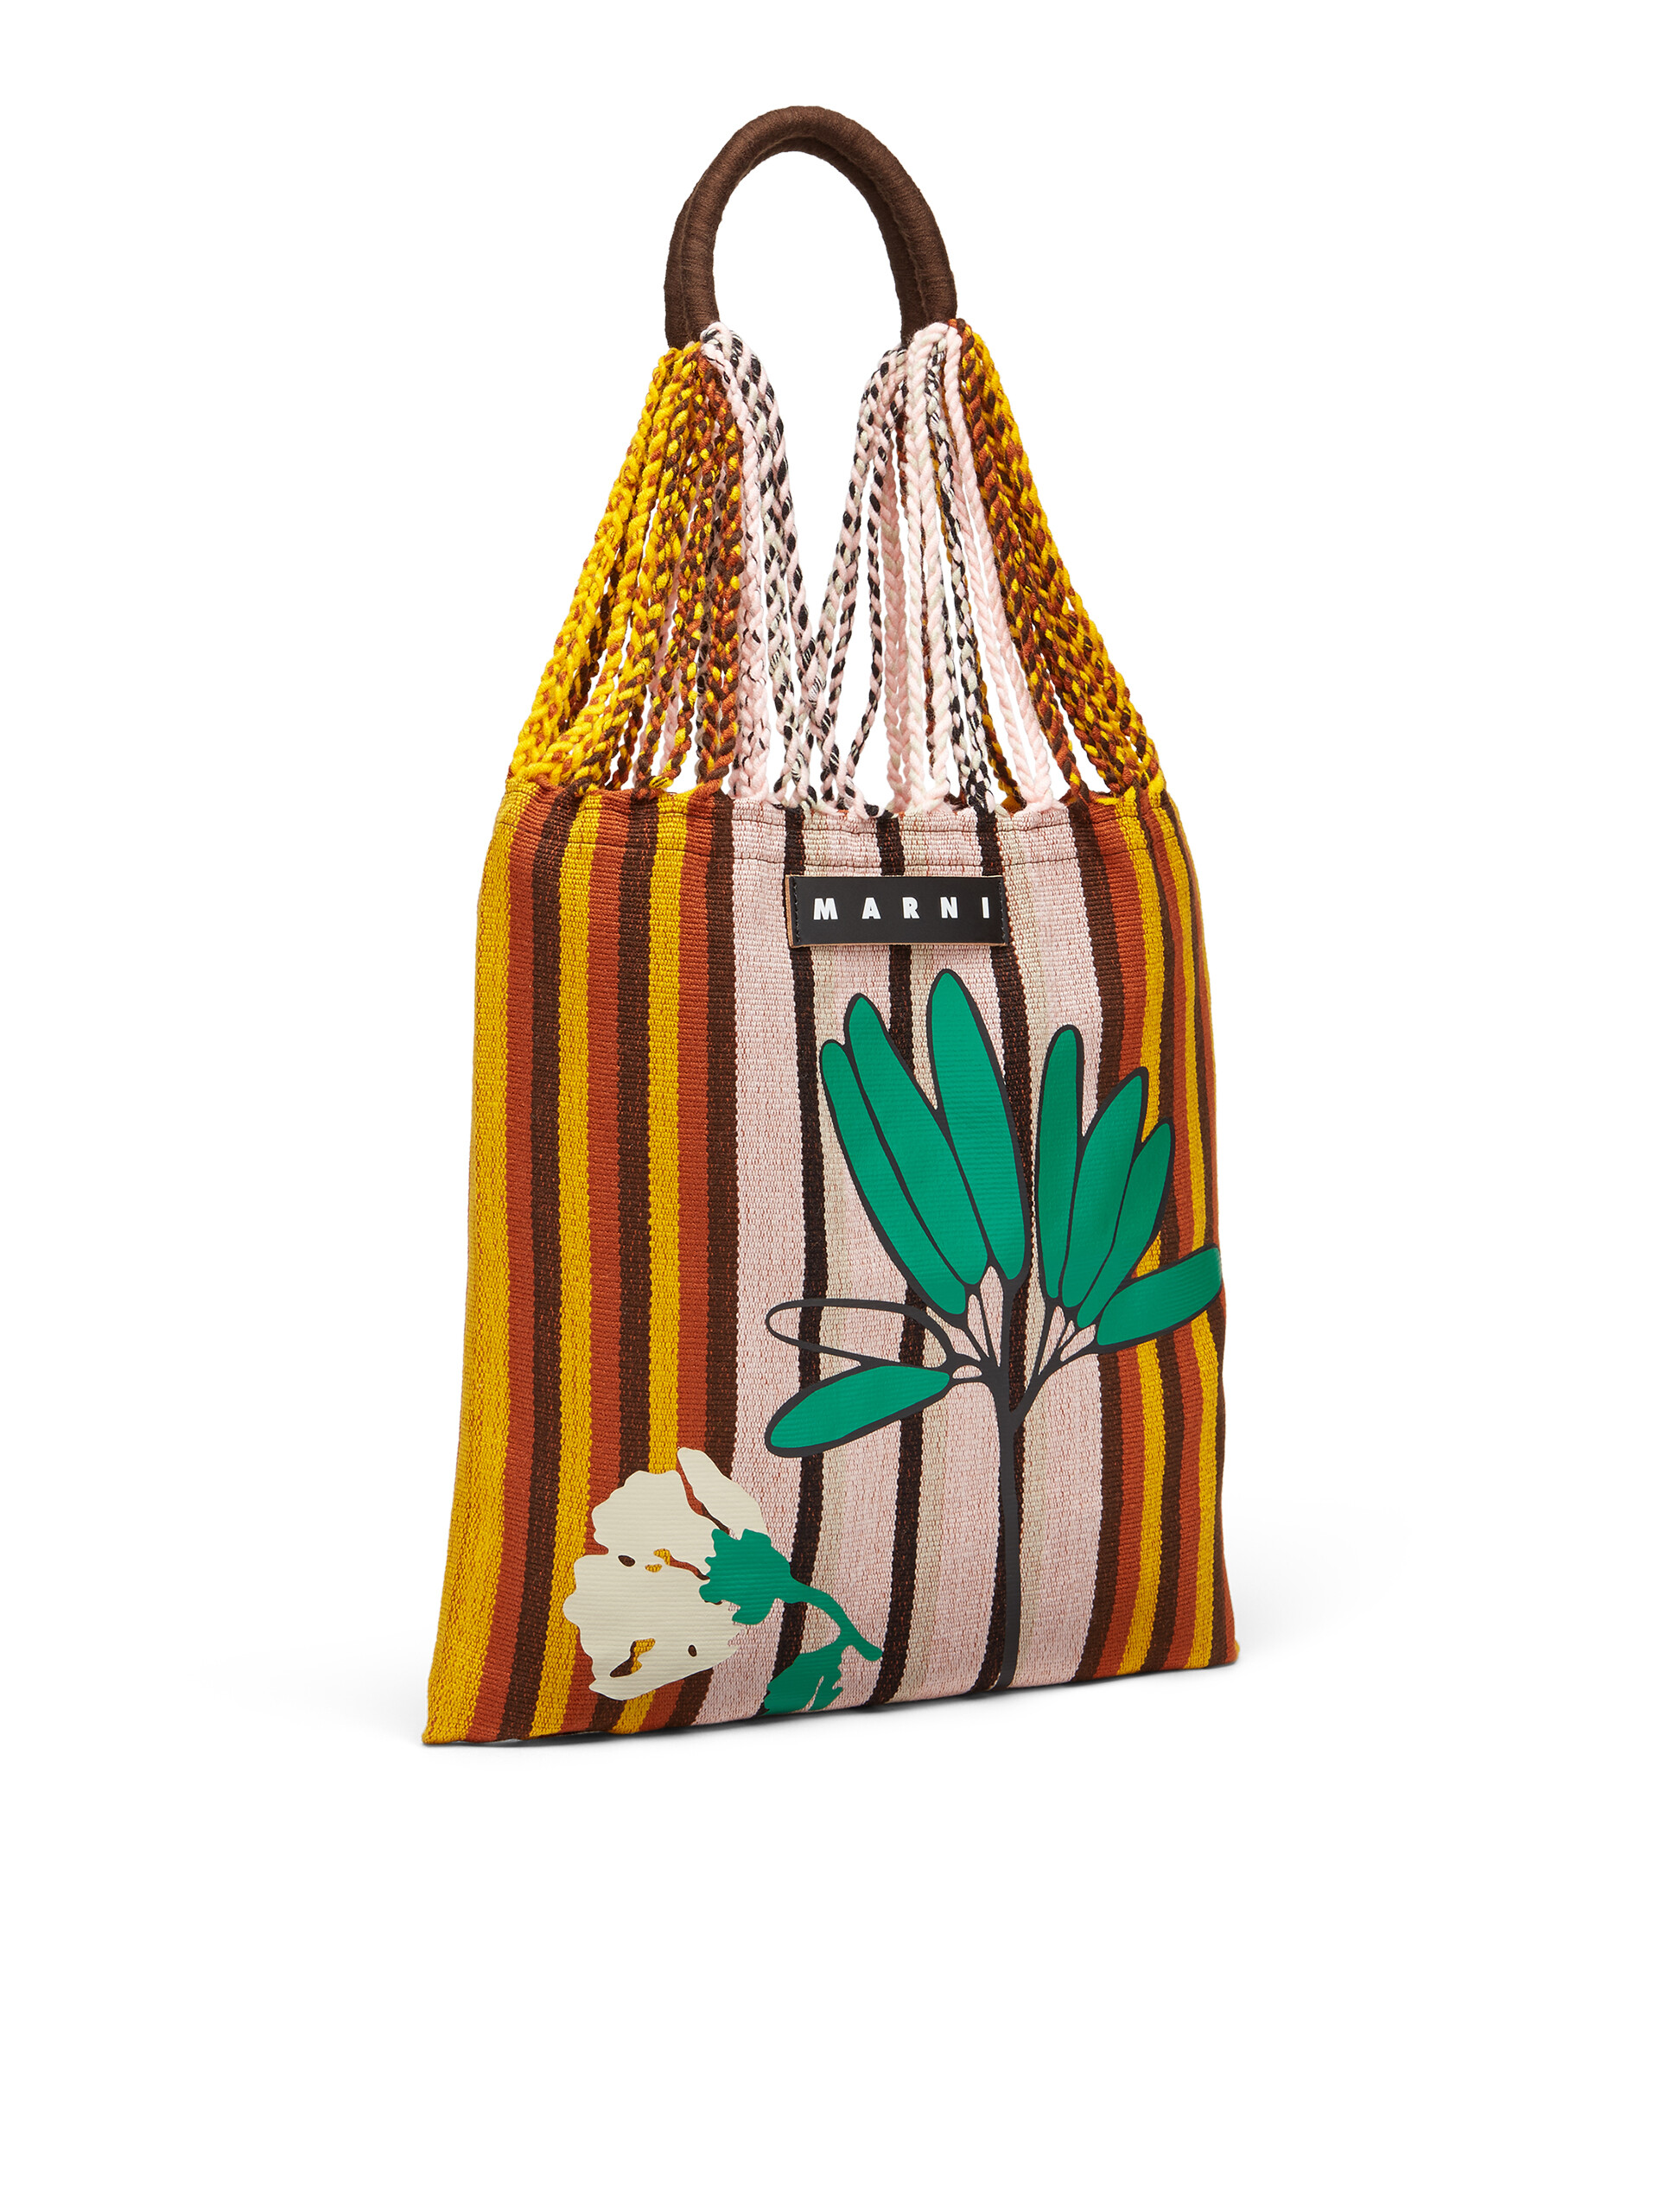 MARNI MARKET HAMMOCK BAG in multicolor crochet with floral motif - Shopping Bags - Image 2